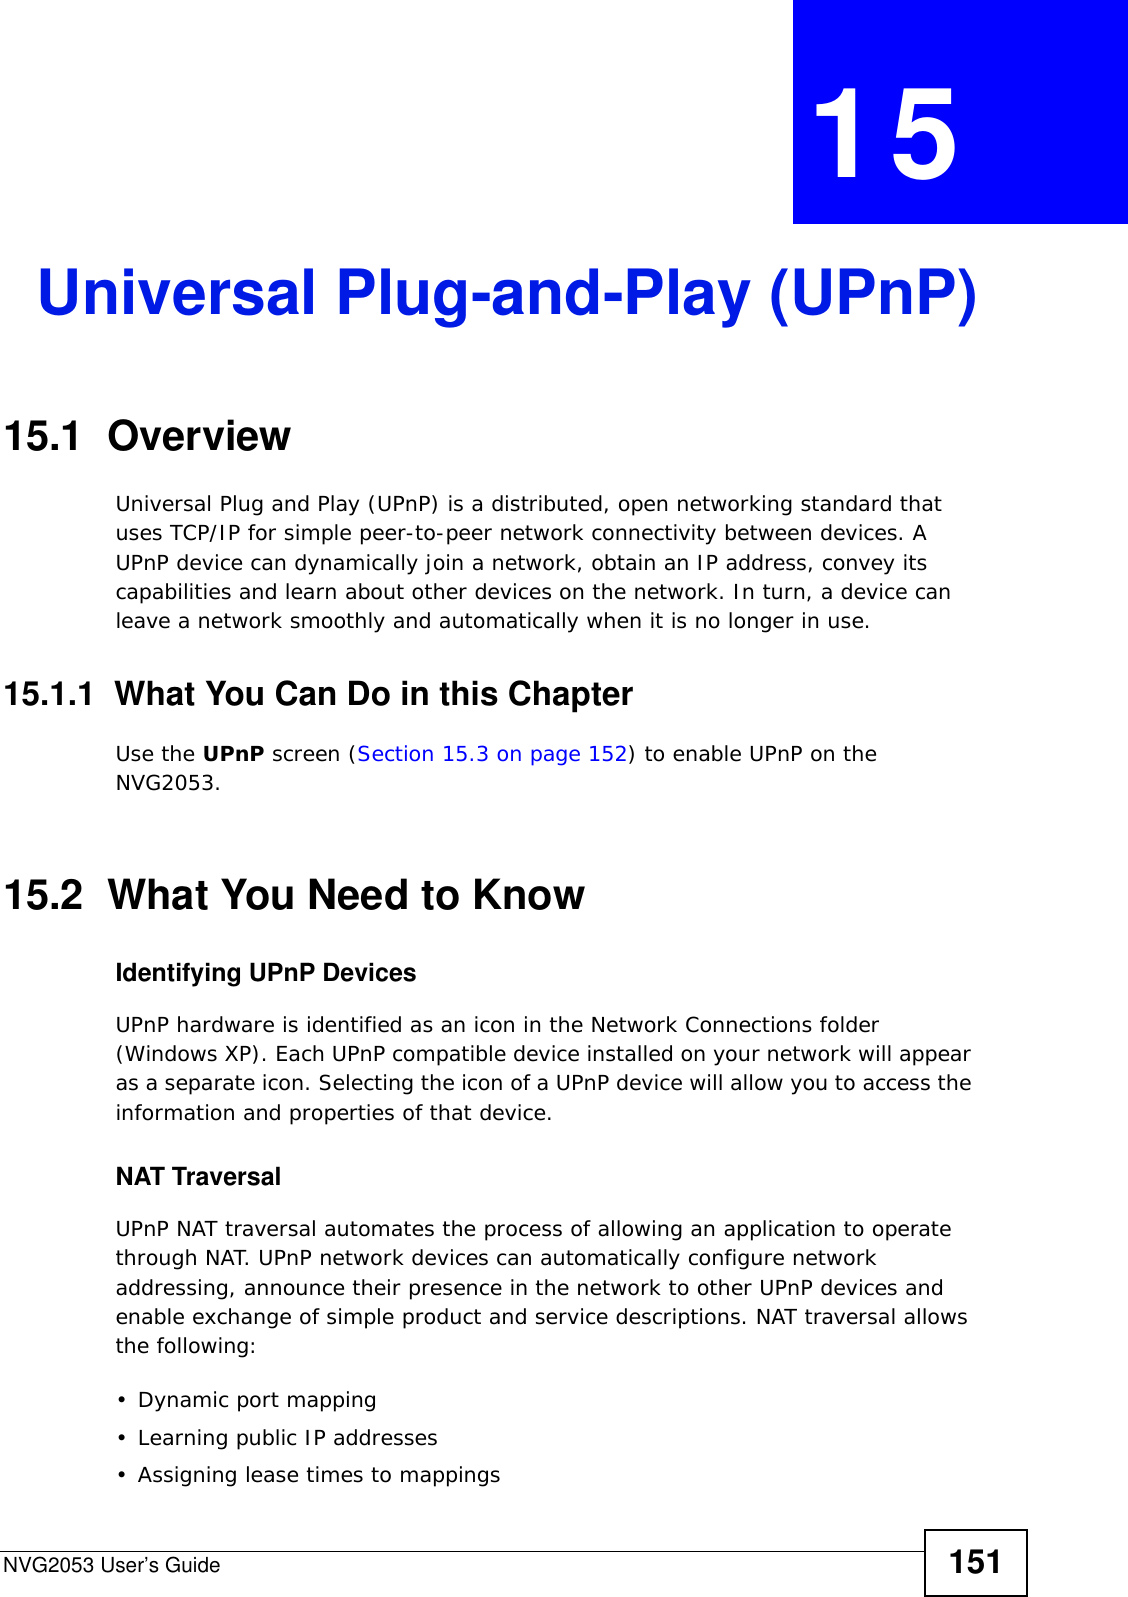 NVG2053 User’s Guide 151CHAPTER  15 Universal Plug-and-Play (UPnP)15.1  Overview Universal Plug and Play (UPnP) is a distributed, open networking standard that uses TCP/IP for simple peer-to-peer network connectivity between devices. A UPnP device can dynamically join a network, obtain an IP address, convey its capabilities and learn about other devices on the network. In turn, a device can leave a network smoothly and automatically when it is no longer in use.15.1.1  What You Can Do in this ChapterUse the UPnP screen (Section 15.3 on page 152) to enable UPnP on the NVG2053.15.2  What You Need to KnowIdentifying UPnP Devices UPnP hardware is identified as an icon in the Network Connections folder (Windows XP). Each UPnP compatible device installed on your network will appear as a separate icon. Selecting the icon of a UPnP device will allow you to access the information and properties of that device. NAT TraversalUPnP NAT traversal automates the process of allowing an application to operate through NAT. UPnP network devices can automatically configure network addressing, announce their presence in the network to other UPnP devices and enable exchange of simple product and service descriptions. NAT traversal allows the following:• Dynamic port mapping• Learning public IP addresses• Assigning lease times to mappings